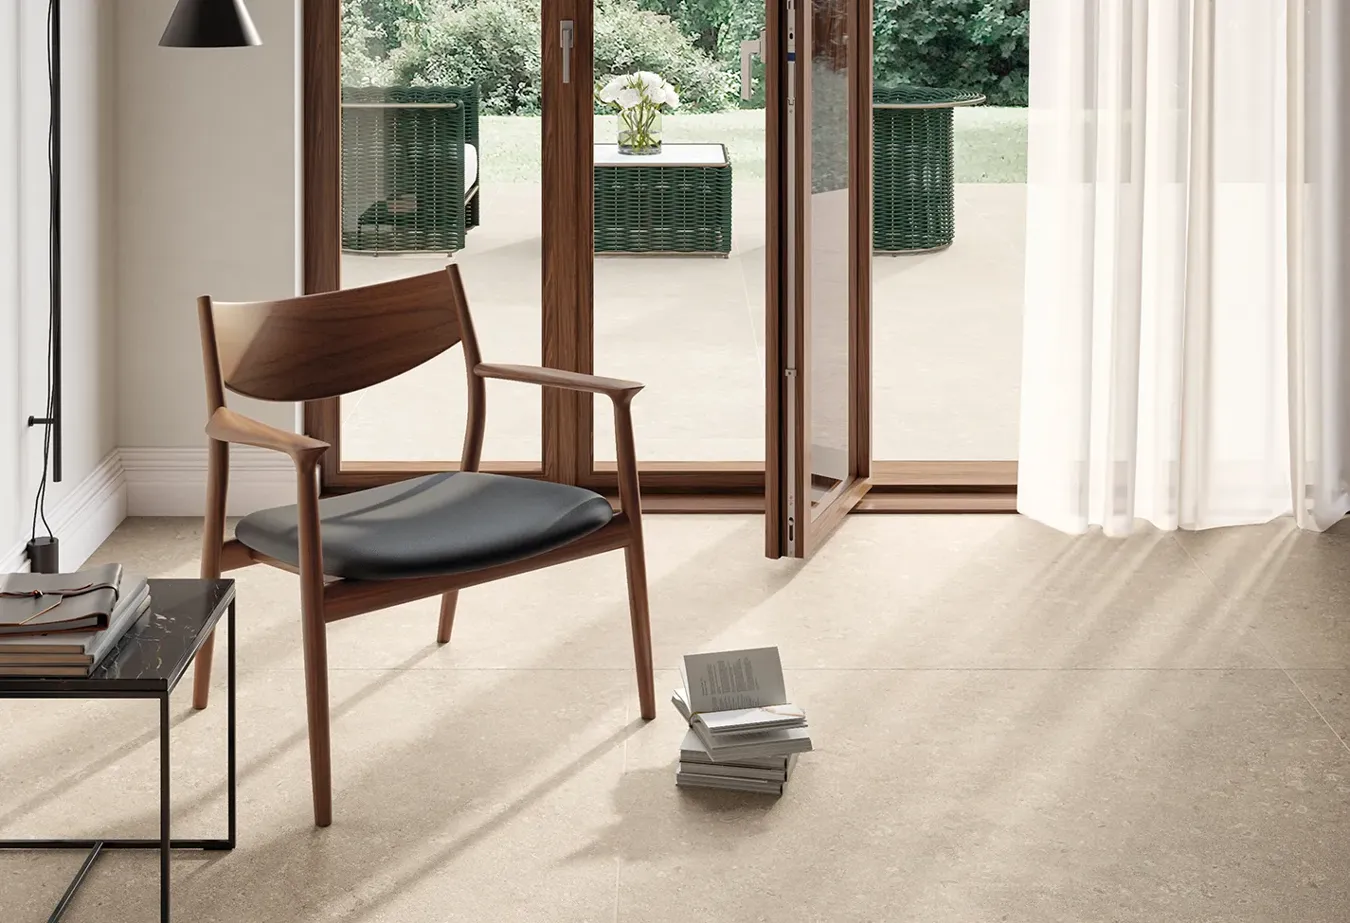 Minimalist interior with beige Heritage stone effect porcelain tiles and modern design chair.